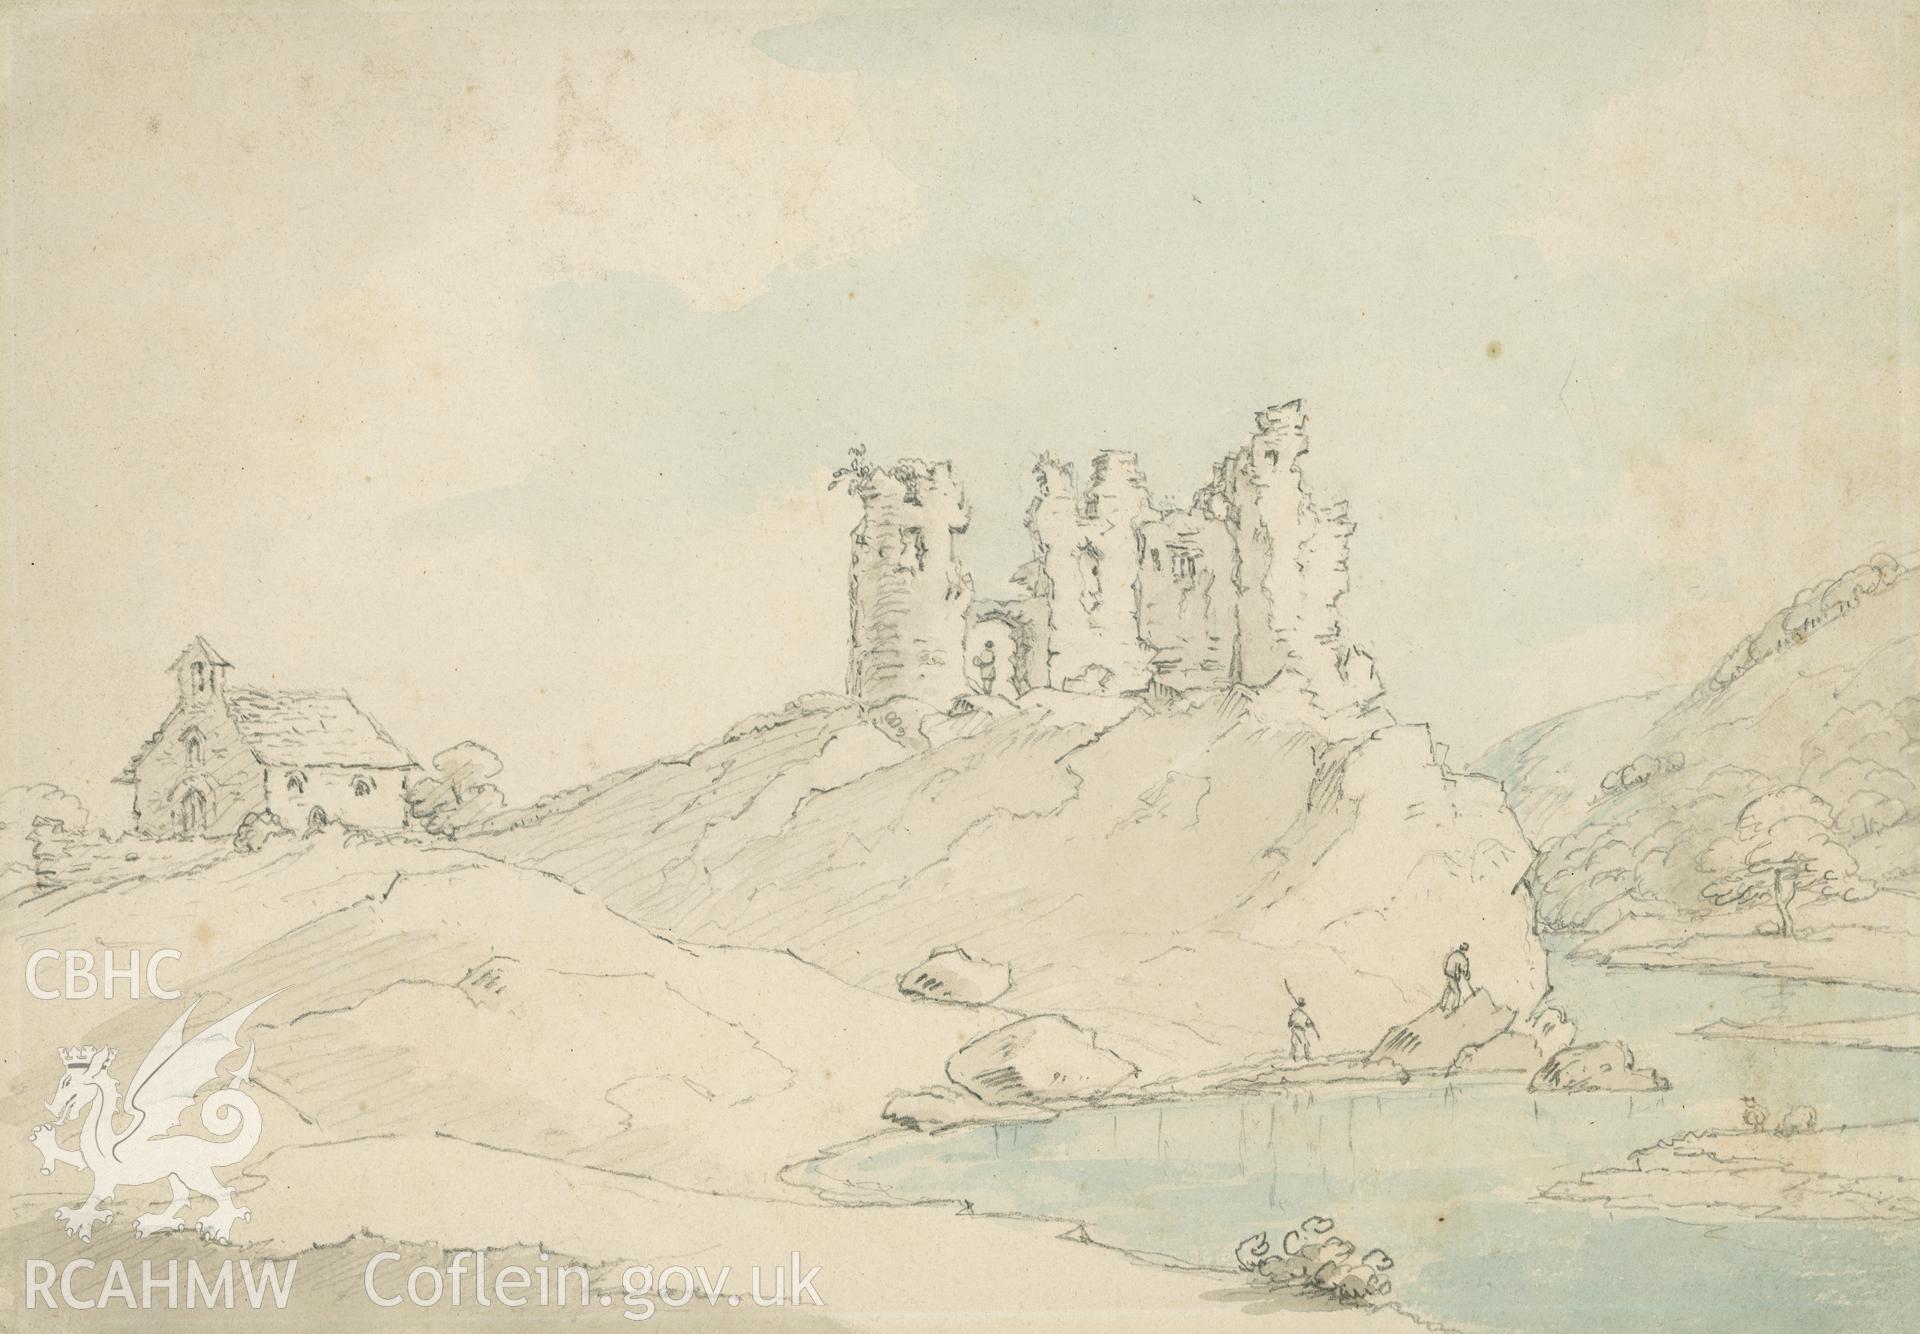 Digital copy of an ink and wash painting showing the castle and church in Newcastle Emlyn painted by Thomas Sunderland, c1800. The church was subsequently demolished and re-erected.